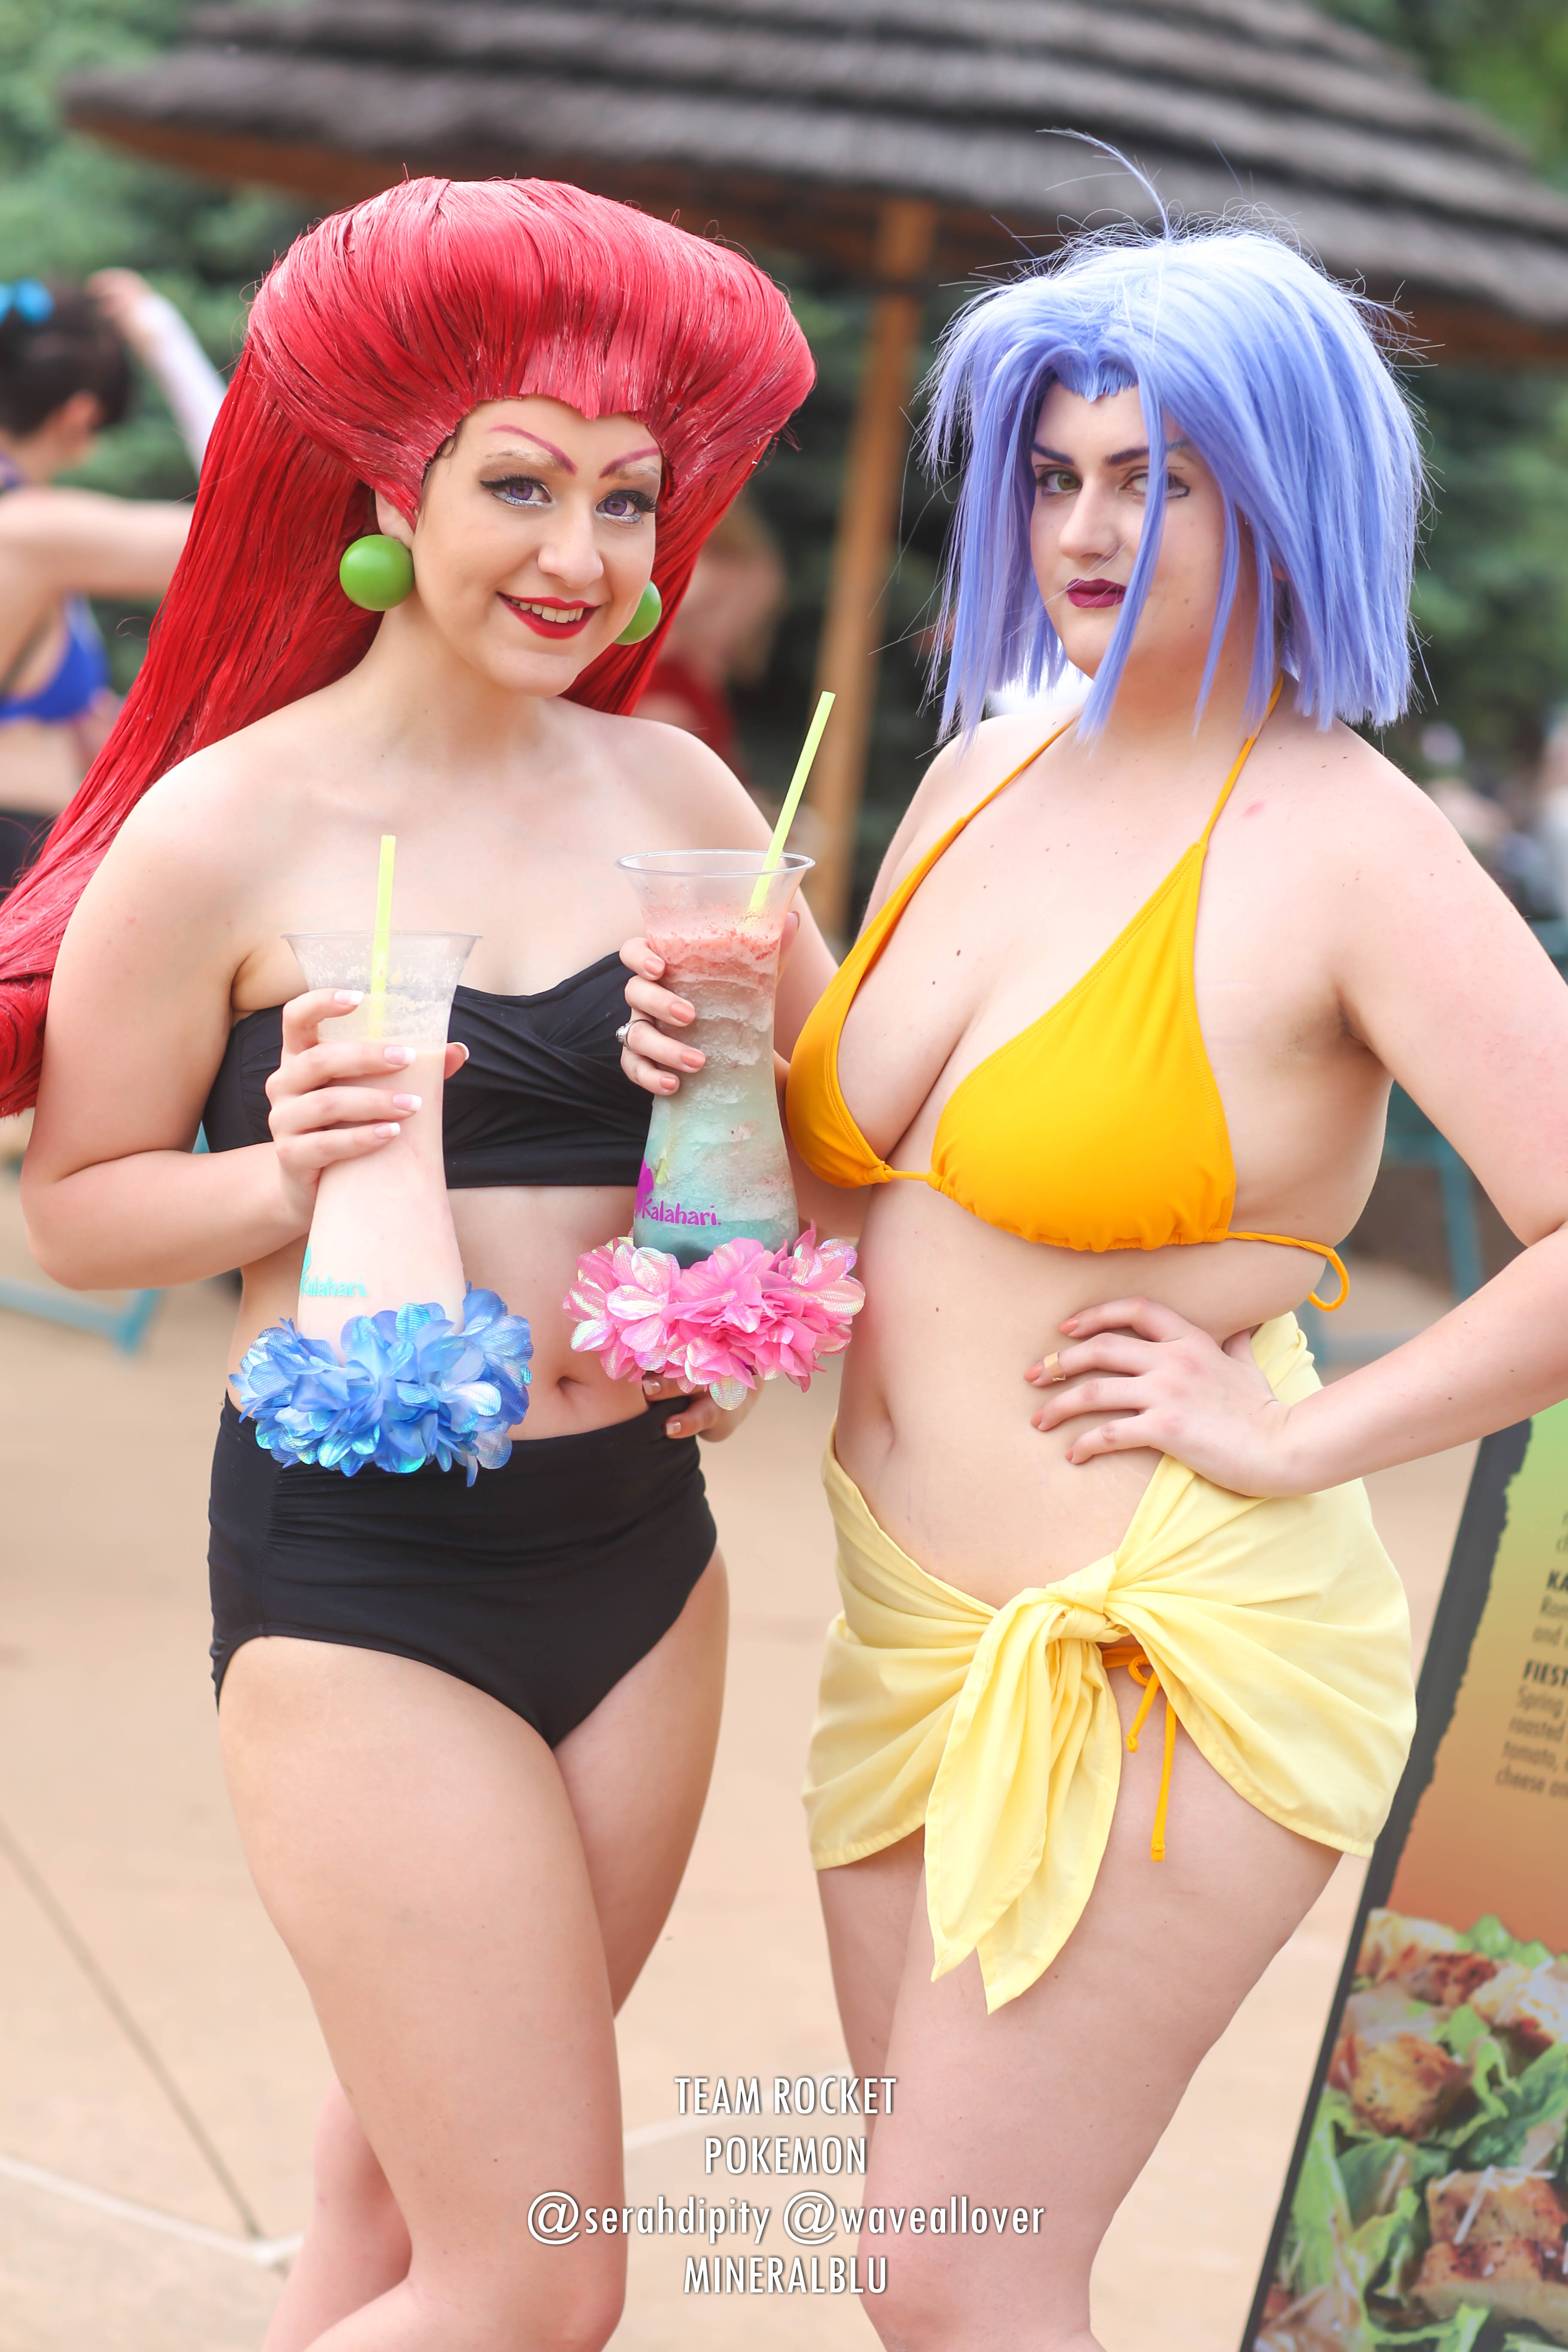 Colossalcon 2019 mineralblu cosplay coverage in partnership with kotaku.